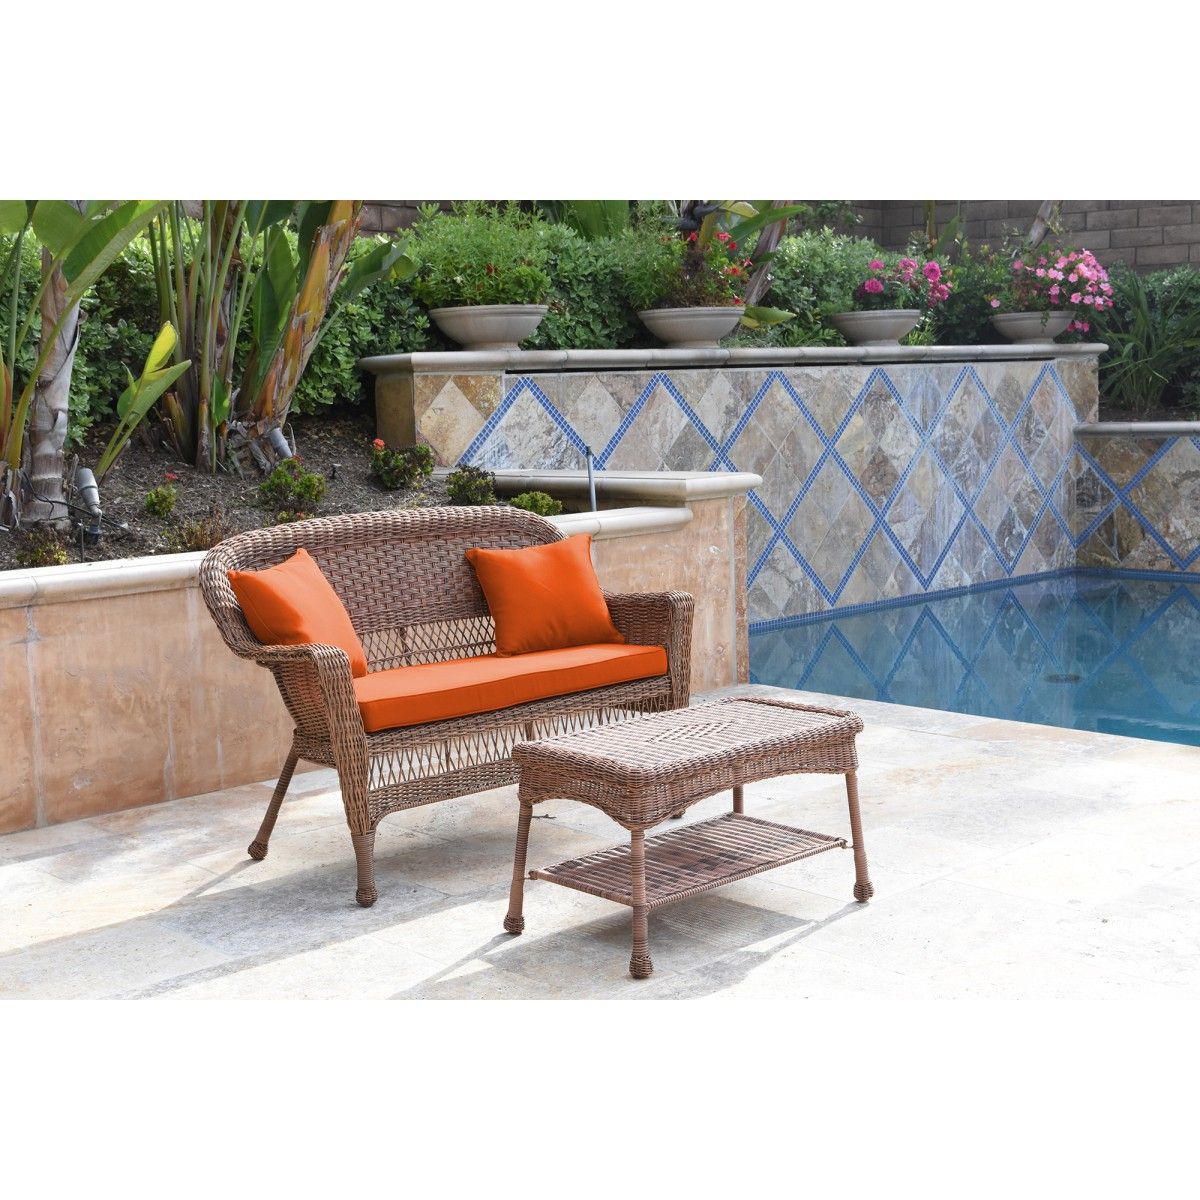 Preferred Outdoor Wicker Orange Cushion Patio Sets Inside Honey Wicker Patio Love Seat And Coffee Table Set With Orange Cushion (View 4 of 15)